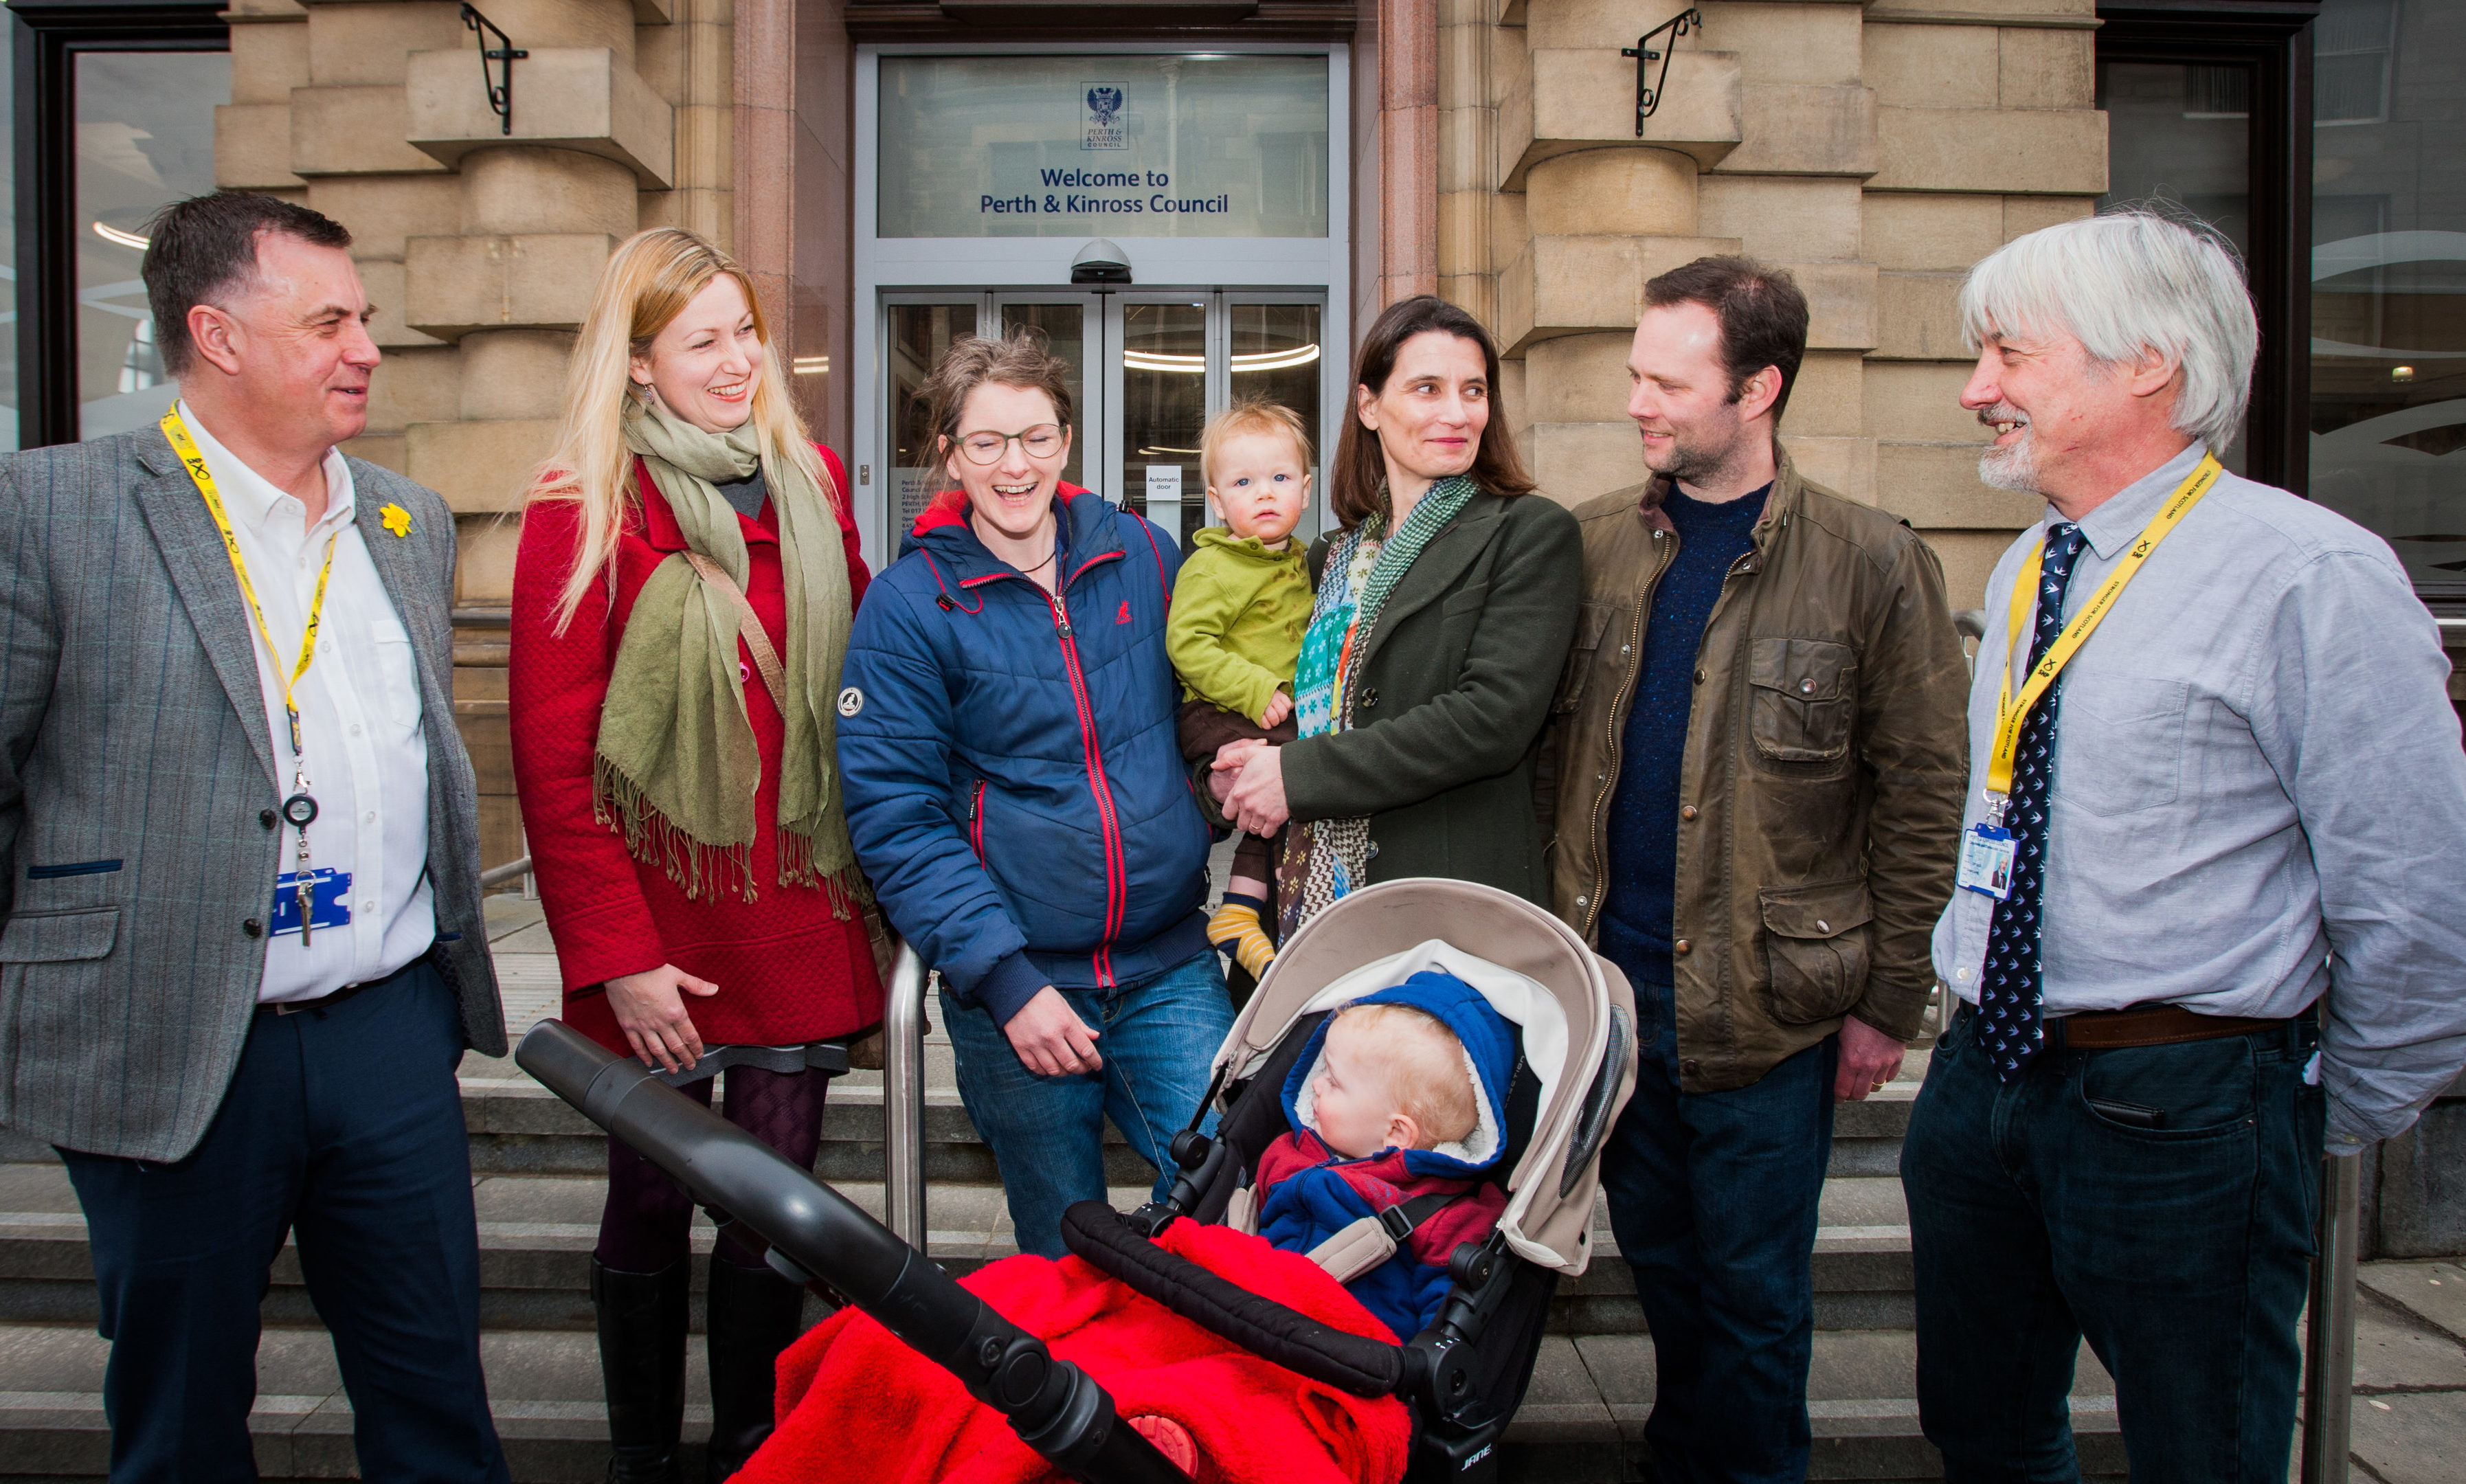 Left to right is Councillor John Rebbeck, alongside concerned parents Sarah Draper, Claudia Massie, her son Magnus Gibson (aged 18 months, in pram), Keesje Crawford-Avis (Chair of Logiealmond Parent Council), her son Ethan Crawford-Avis (aged 1) and husband Oliver Crawford-Avis, with Councillor Grant Laing.